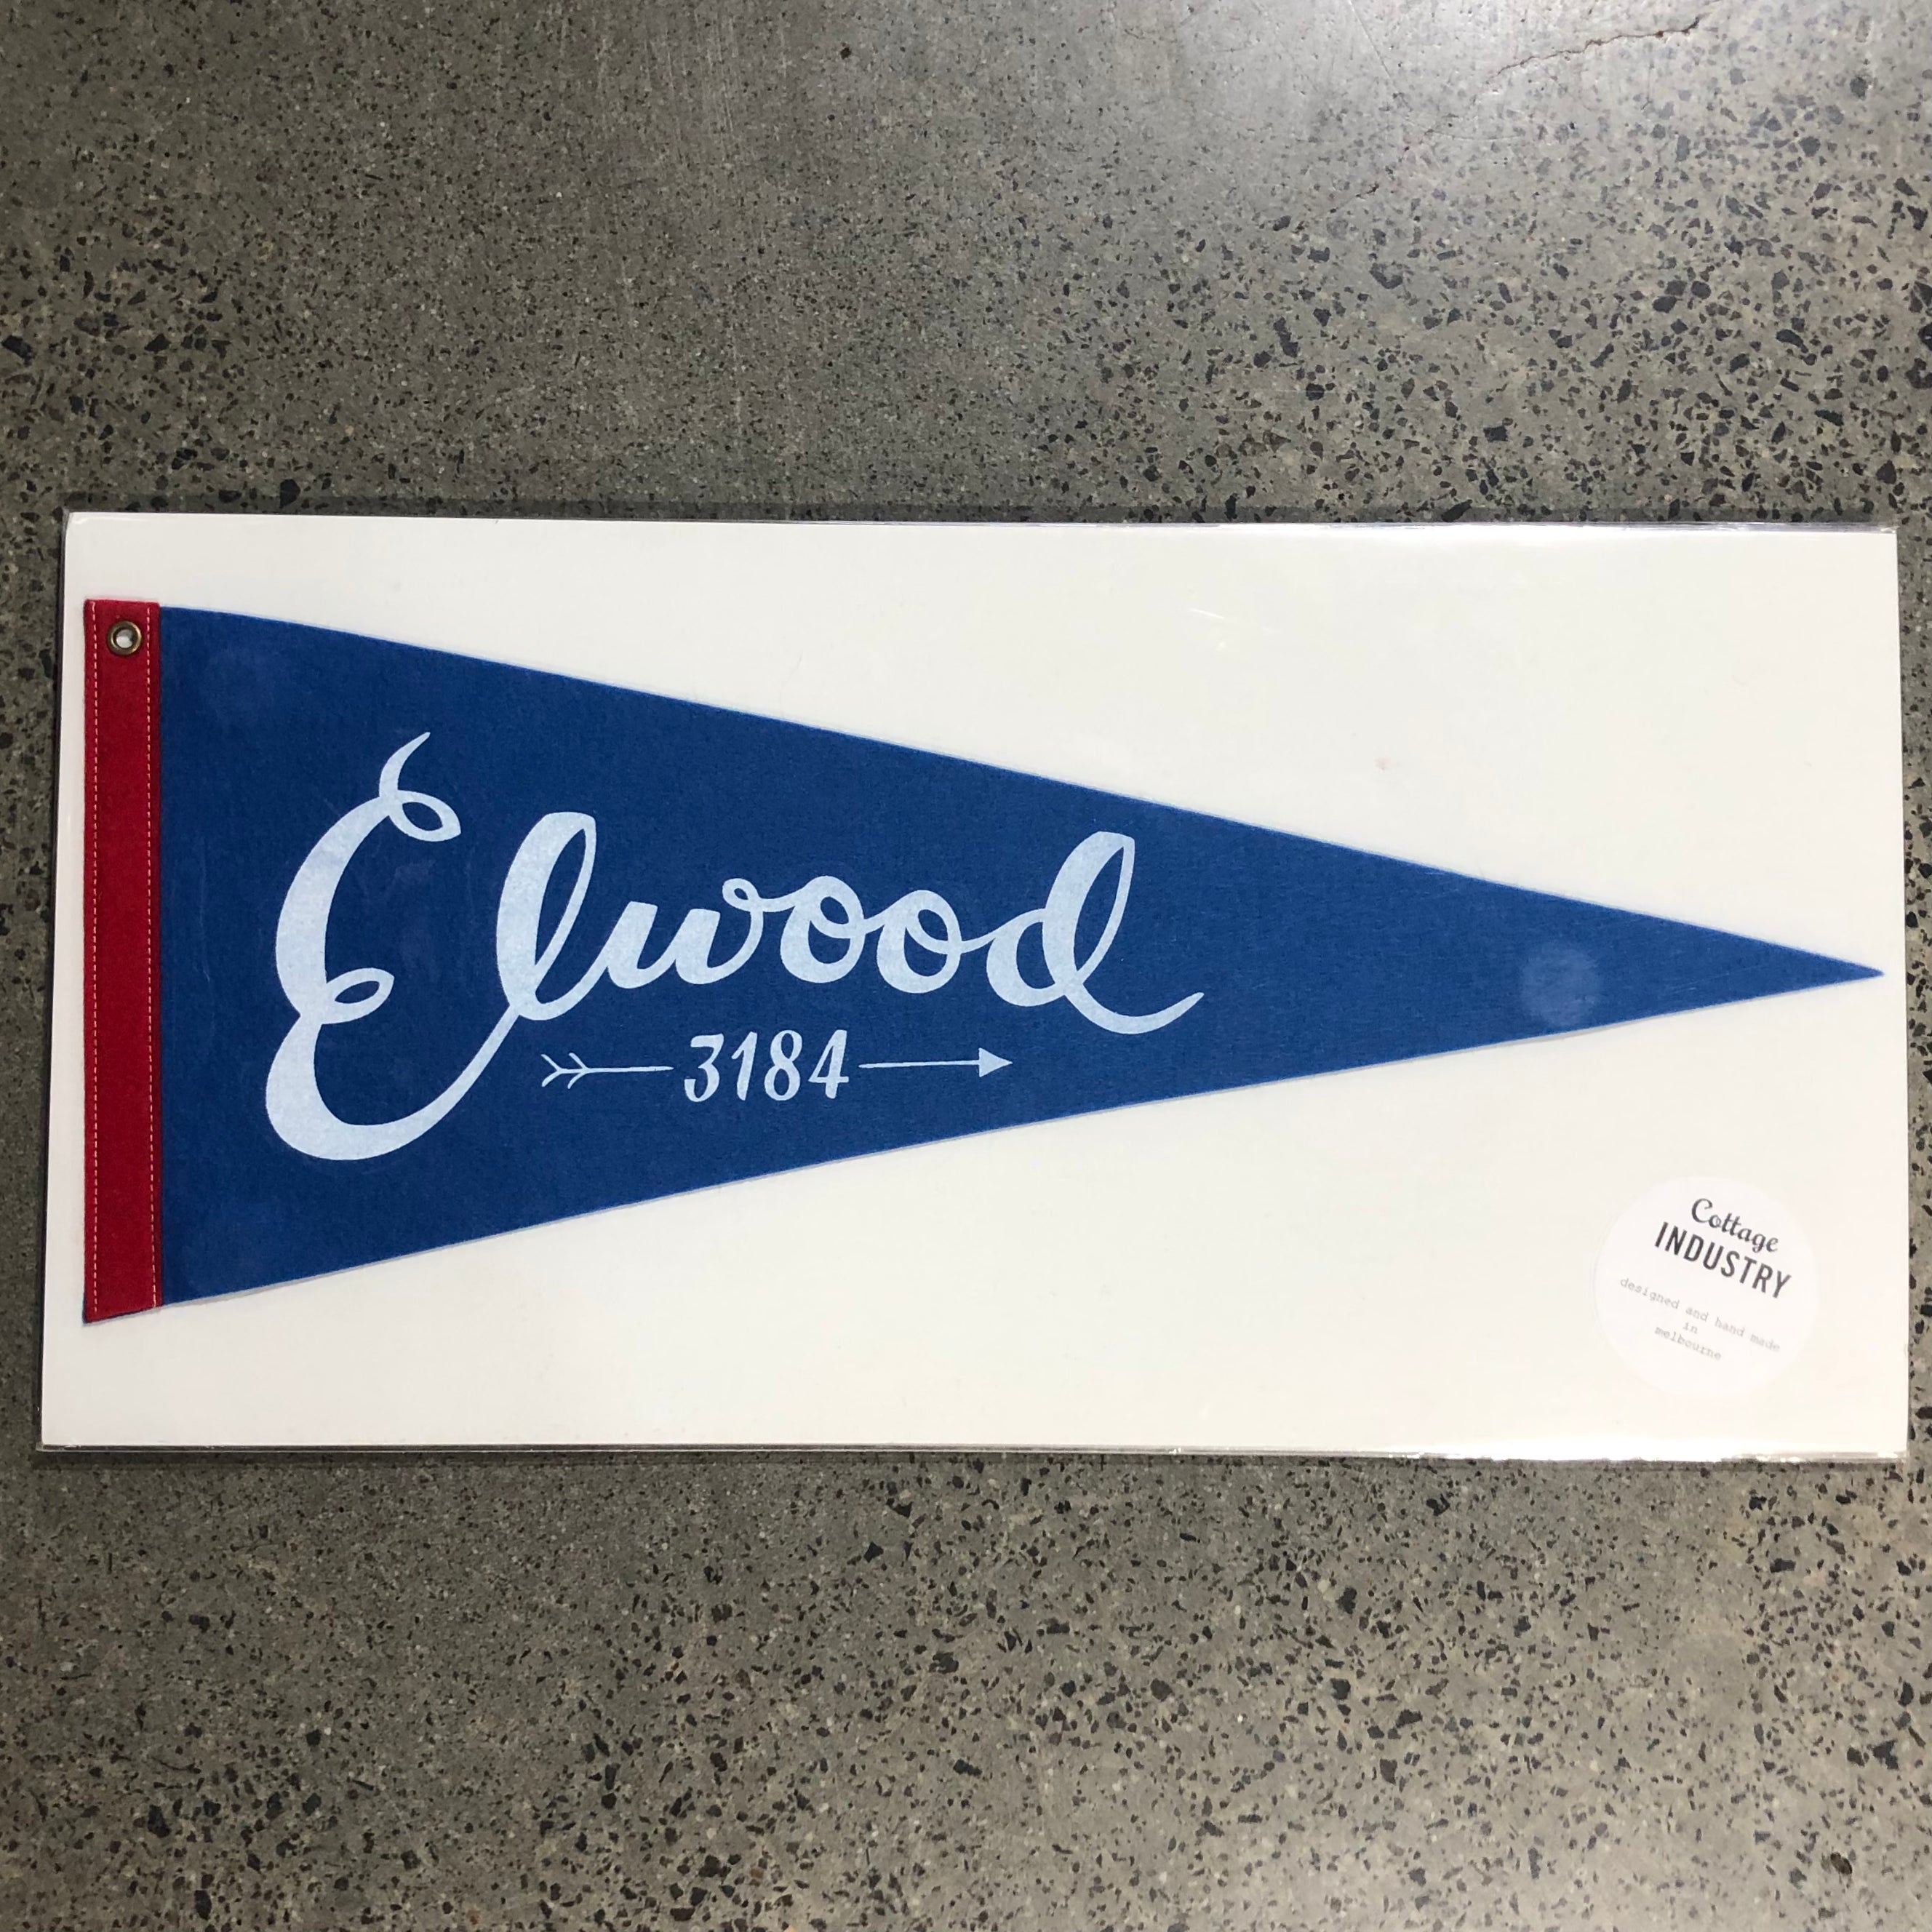 Pennant Elwood in Blue and Red